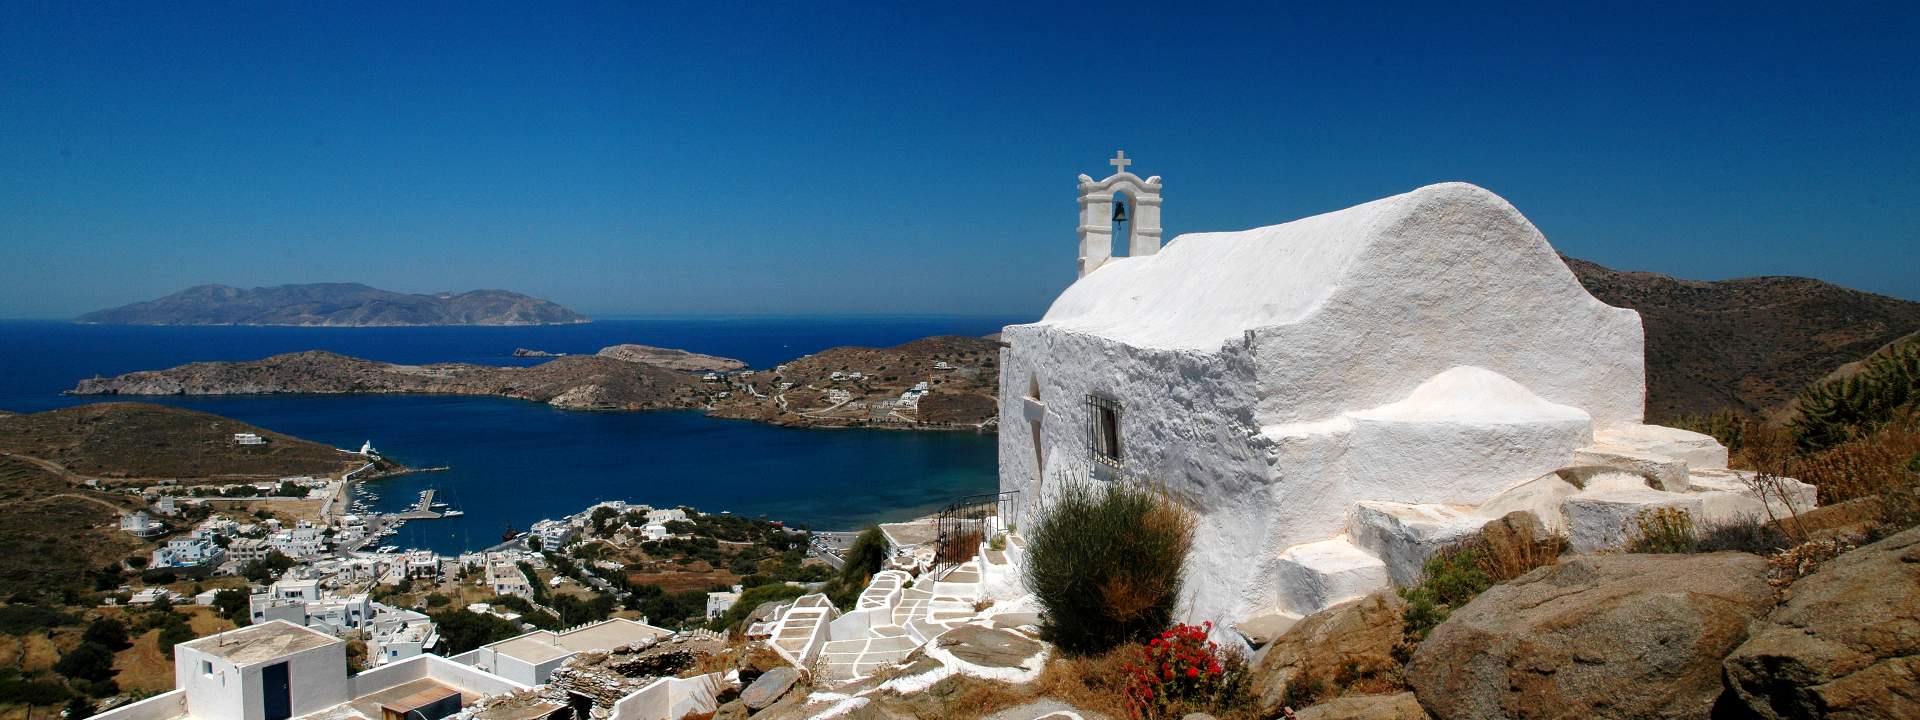 From the Cyclades to the Dodecanese via Bodrum